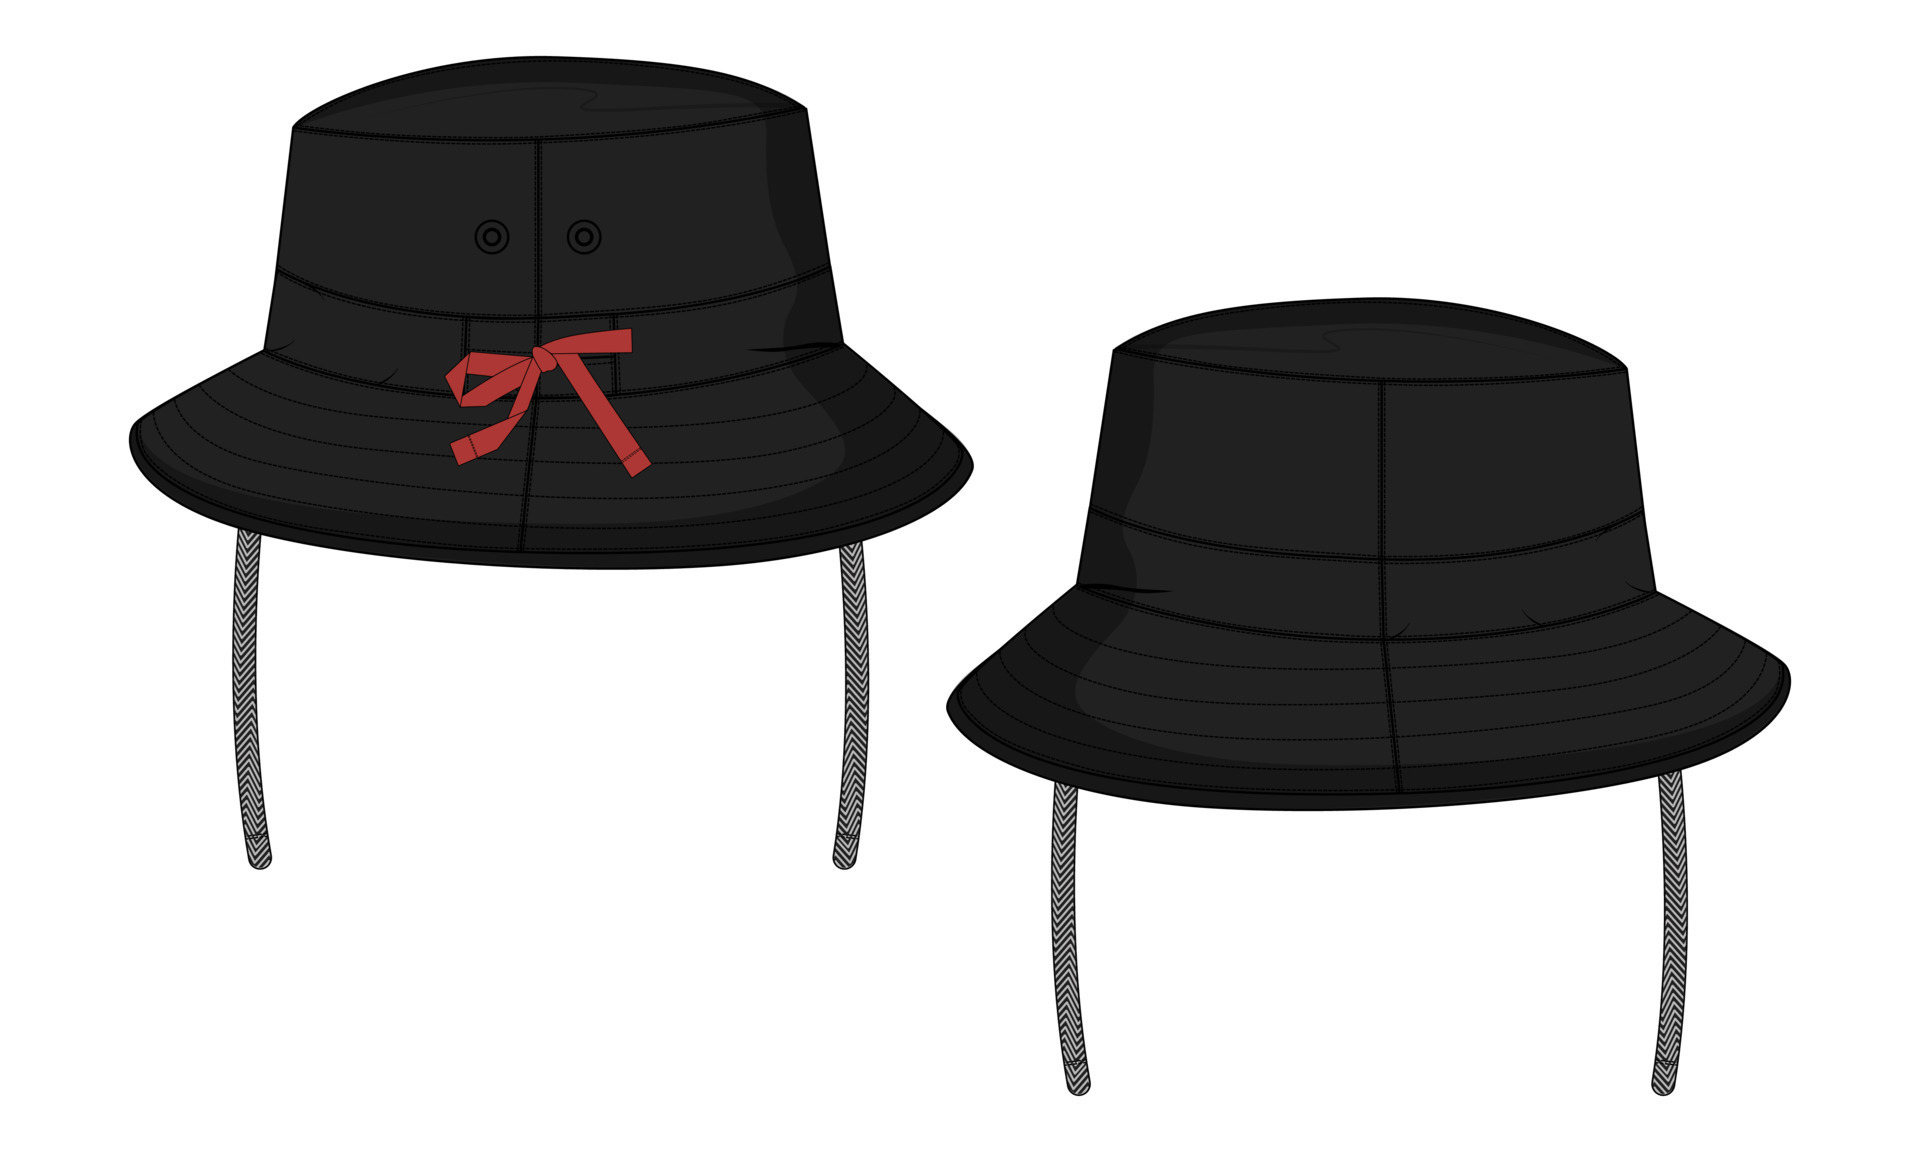 Bucket hat Technical drawing fashion flat sketch vector